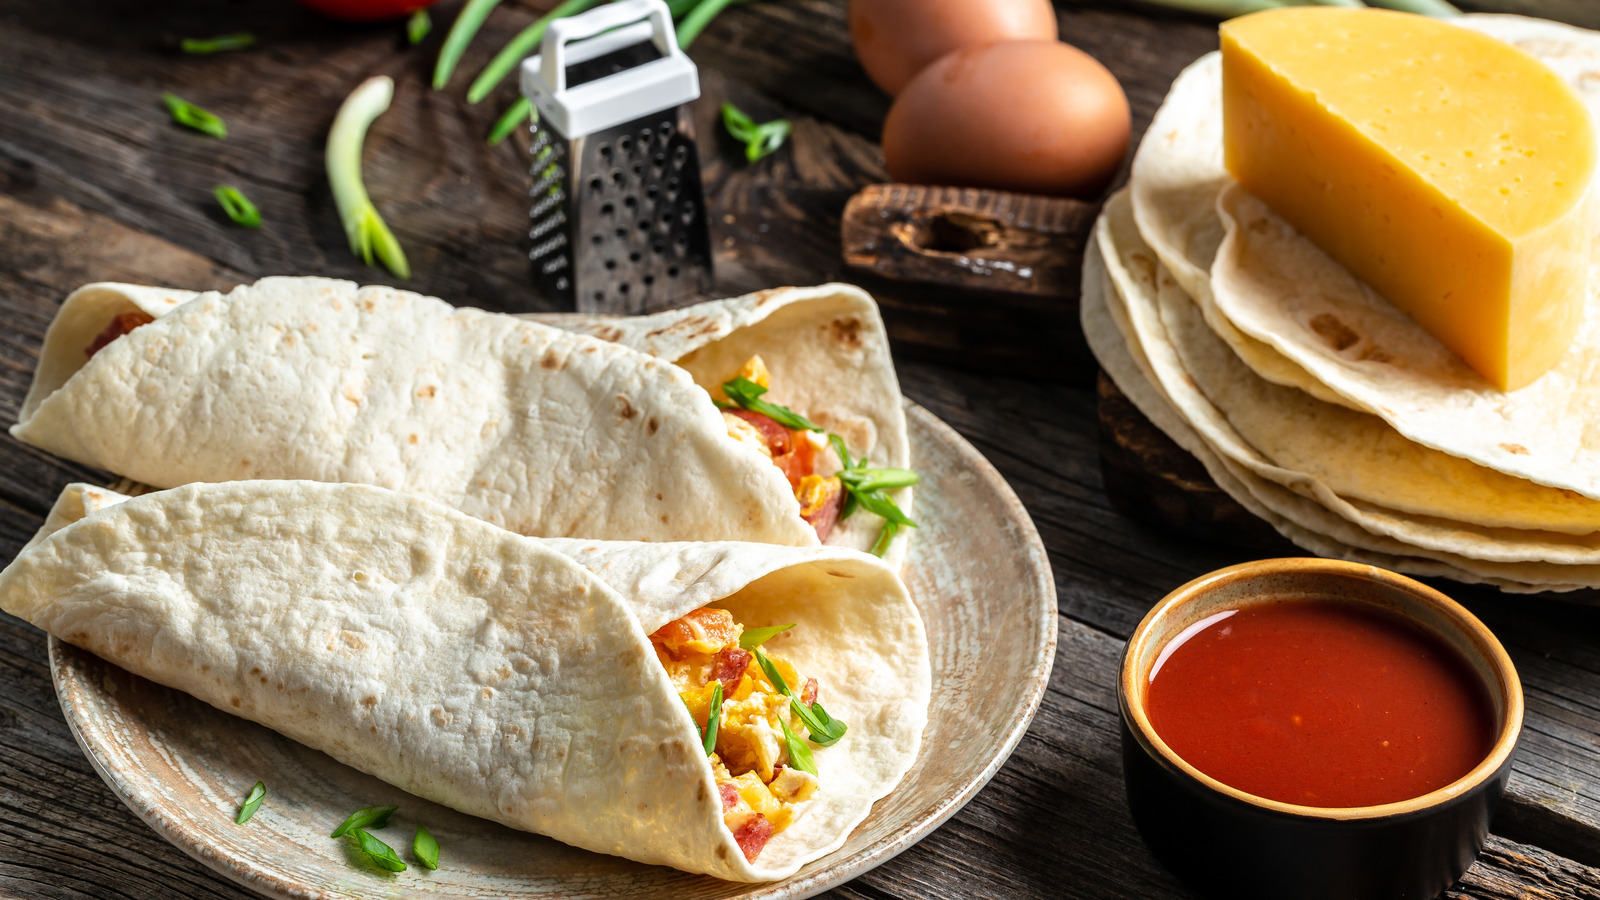 https://www.thedailymeal.com/img/gallery/15-ingredients-you-never-thought-to-put-in-breakfast-burritos/l-intro-1693938095.jpg